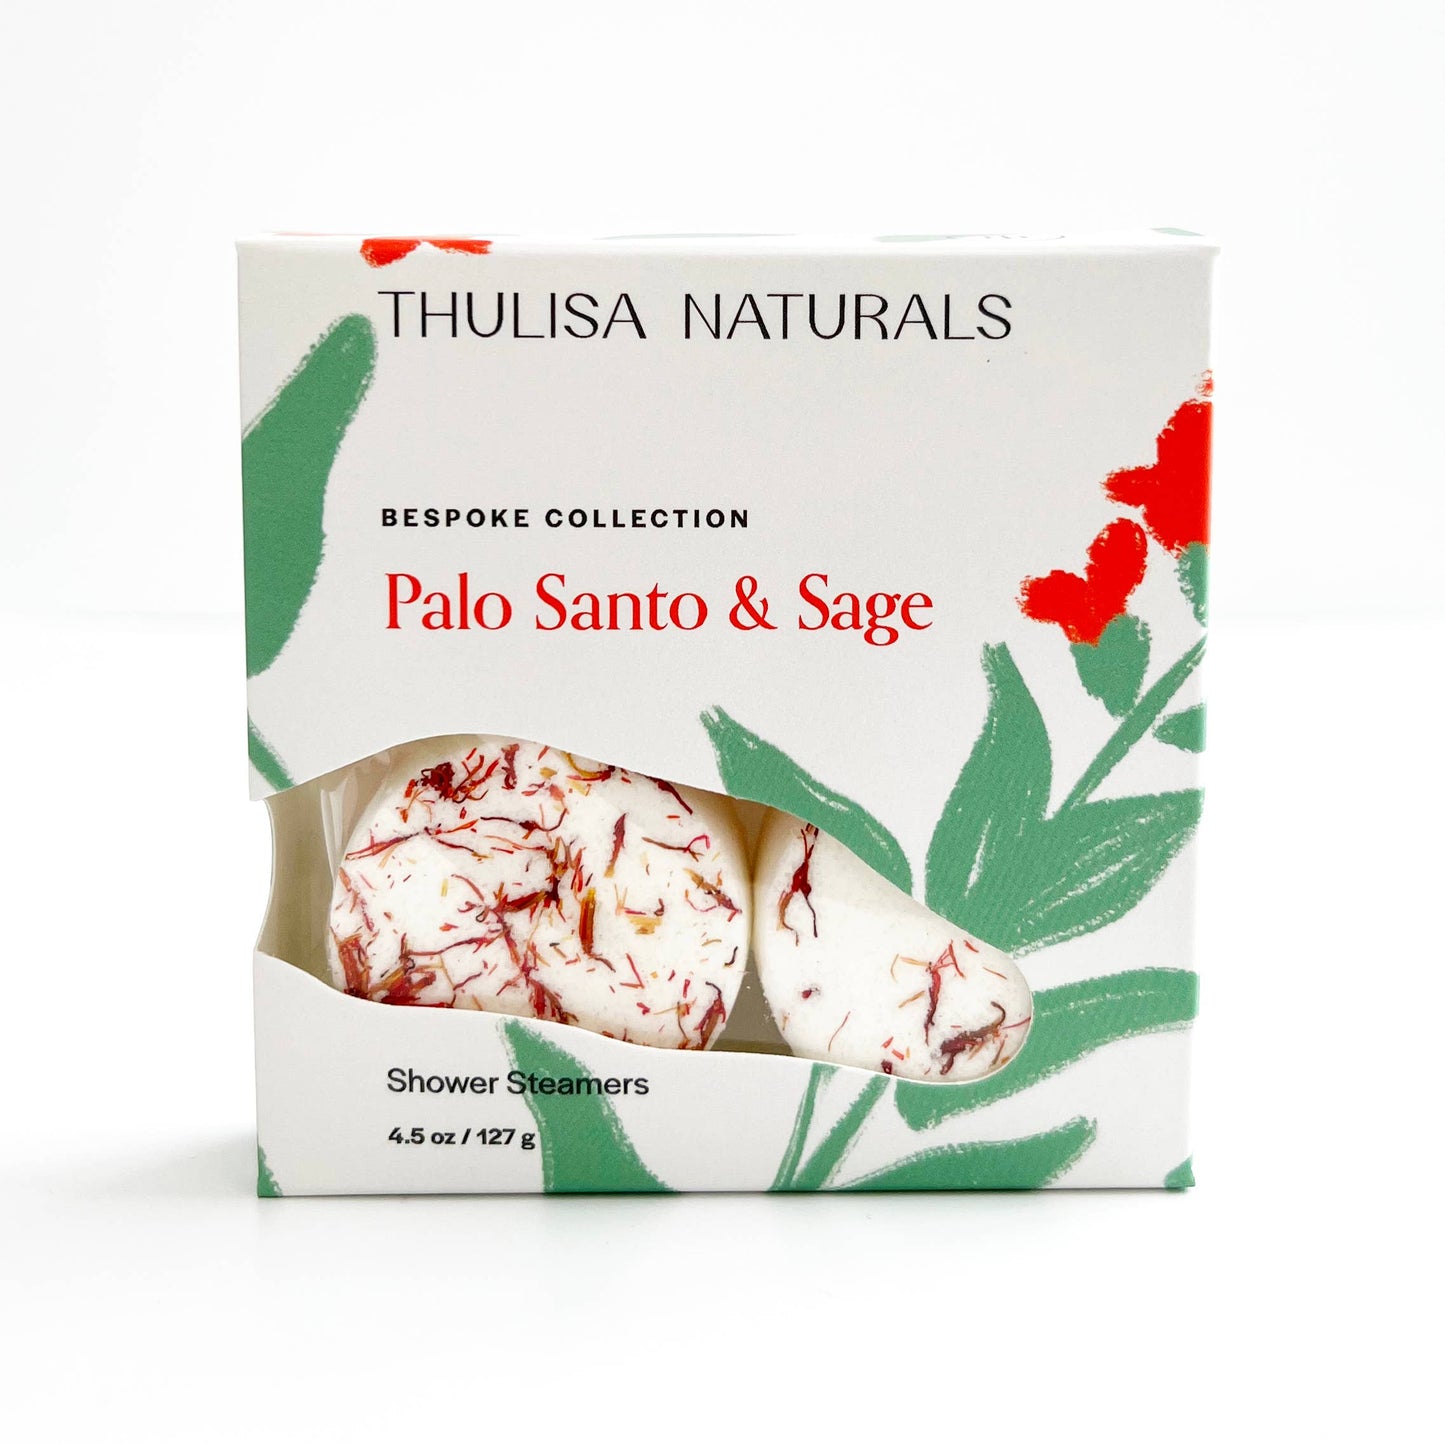 Shower Steamers - Palo Santo + Sage (Bespoke Collection) Home Goods Thulisa Naturals | Bath + Body   